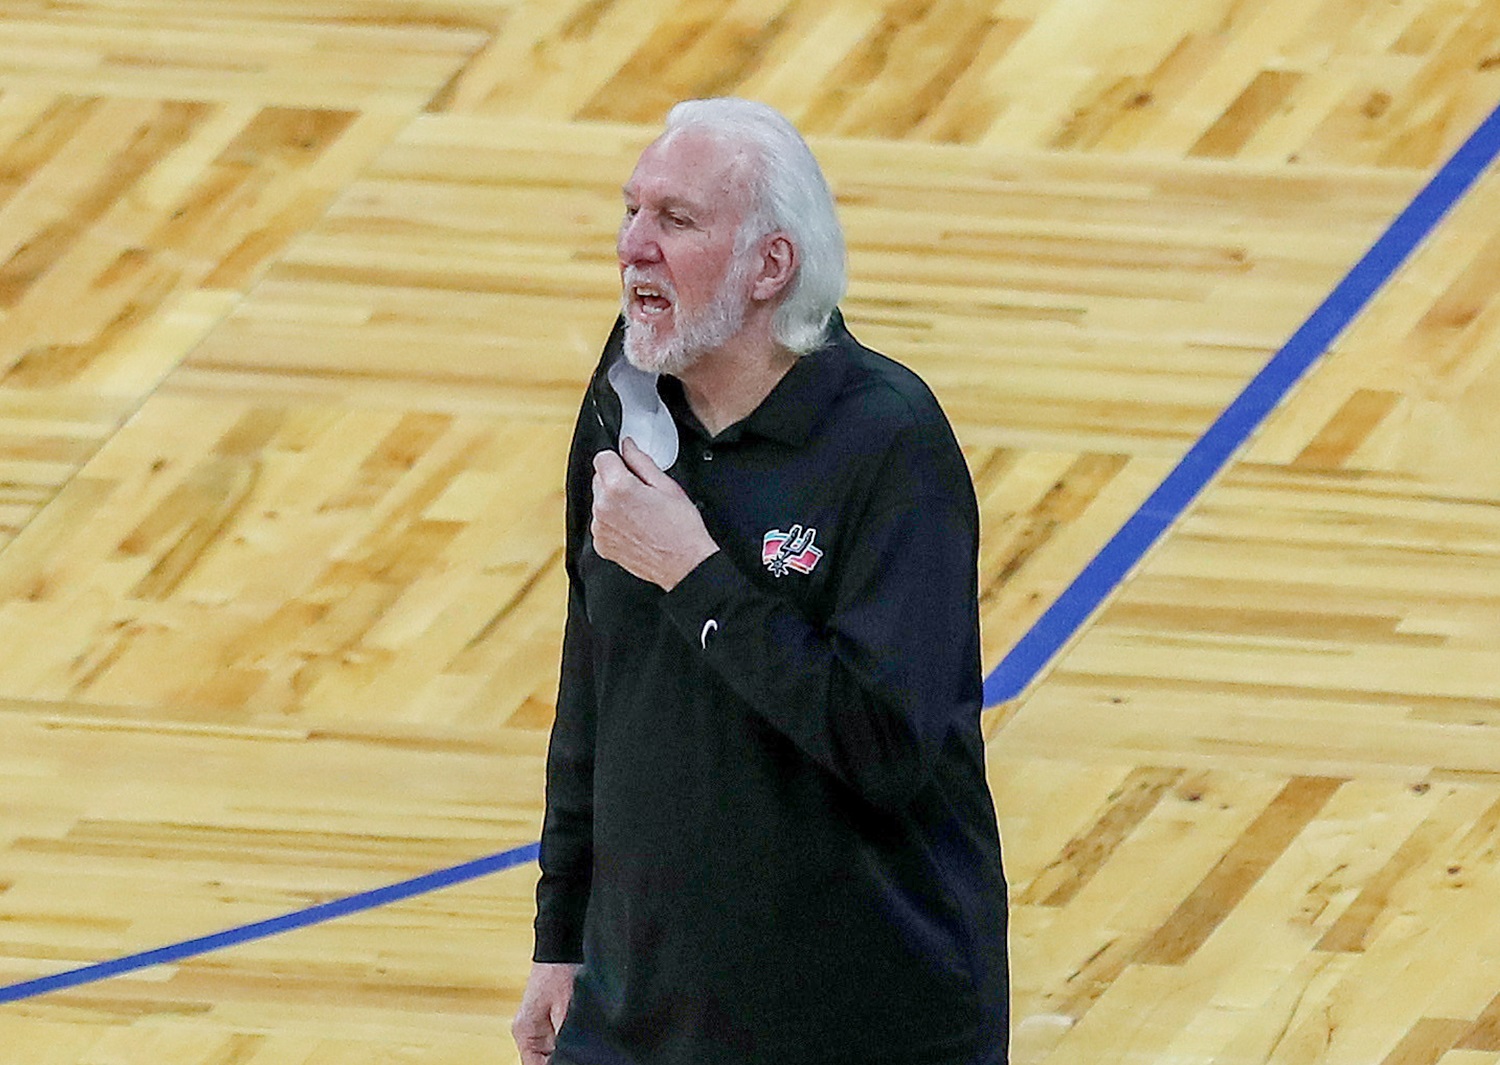 San Antonio Spurs head coach Gregg Popovich on the sideline against the Orlando Magic at Amway Center on April 12, 2021 in Orlando, Florida.